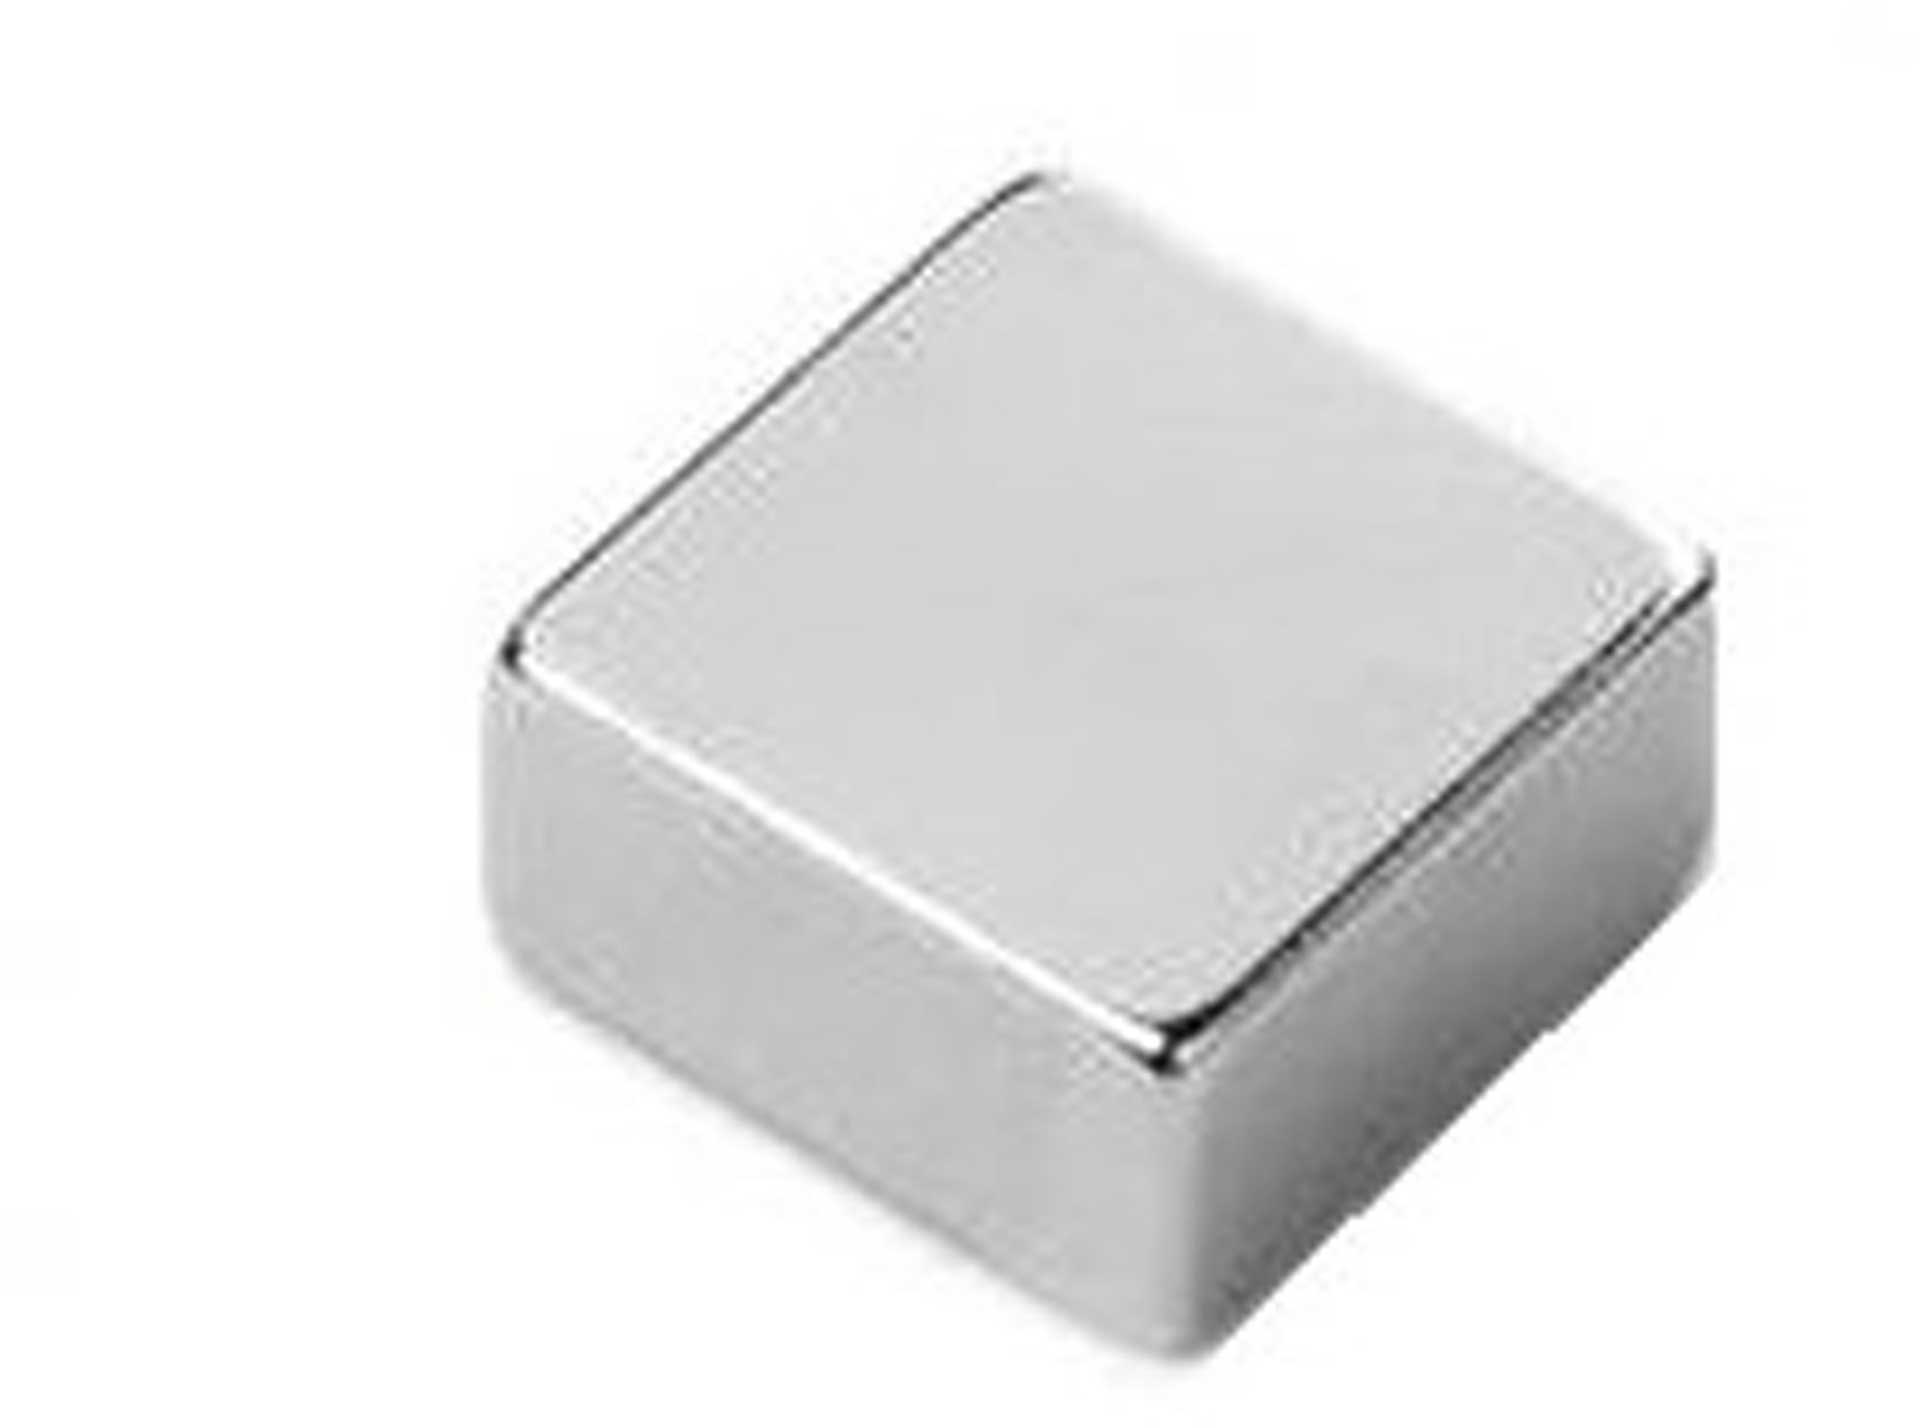 Robbe Modellsport SQUARE MAGNET 5X5X3MM NICKEL PLATED 10PCS.